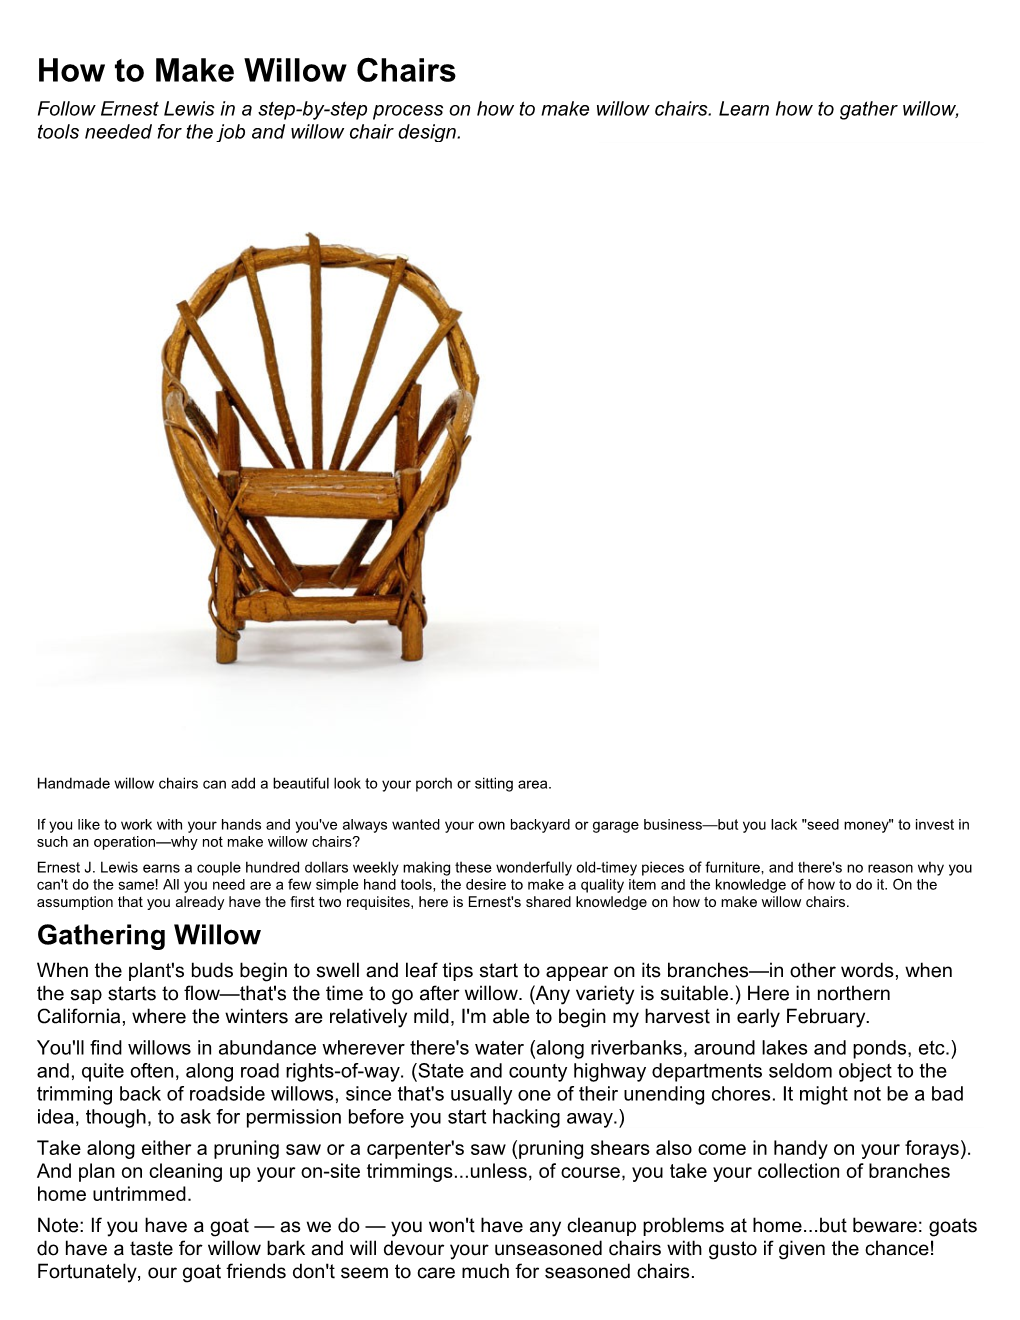 How to Make Willow Chairs